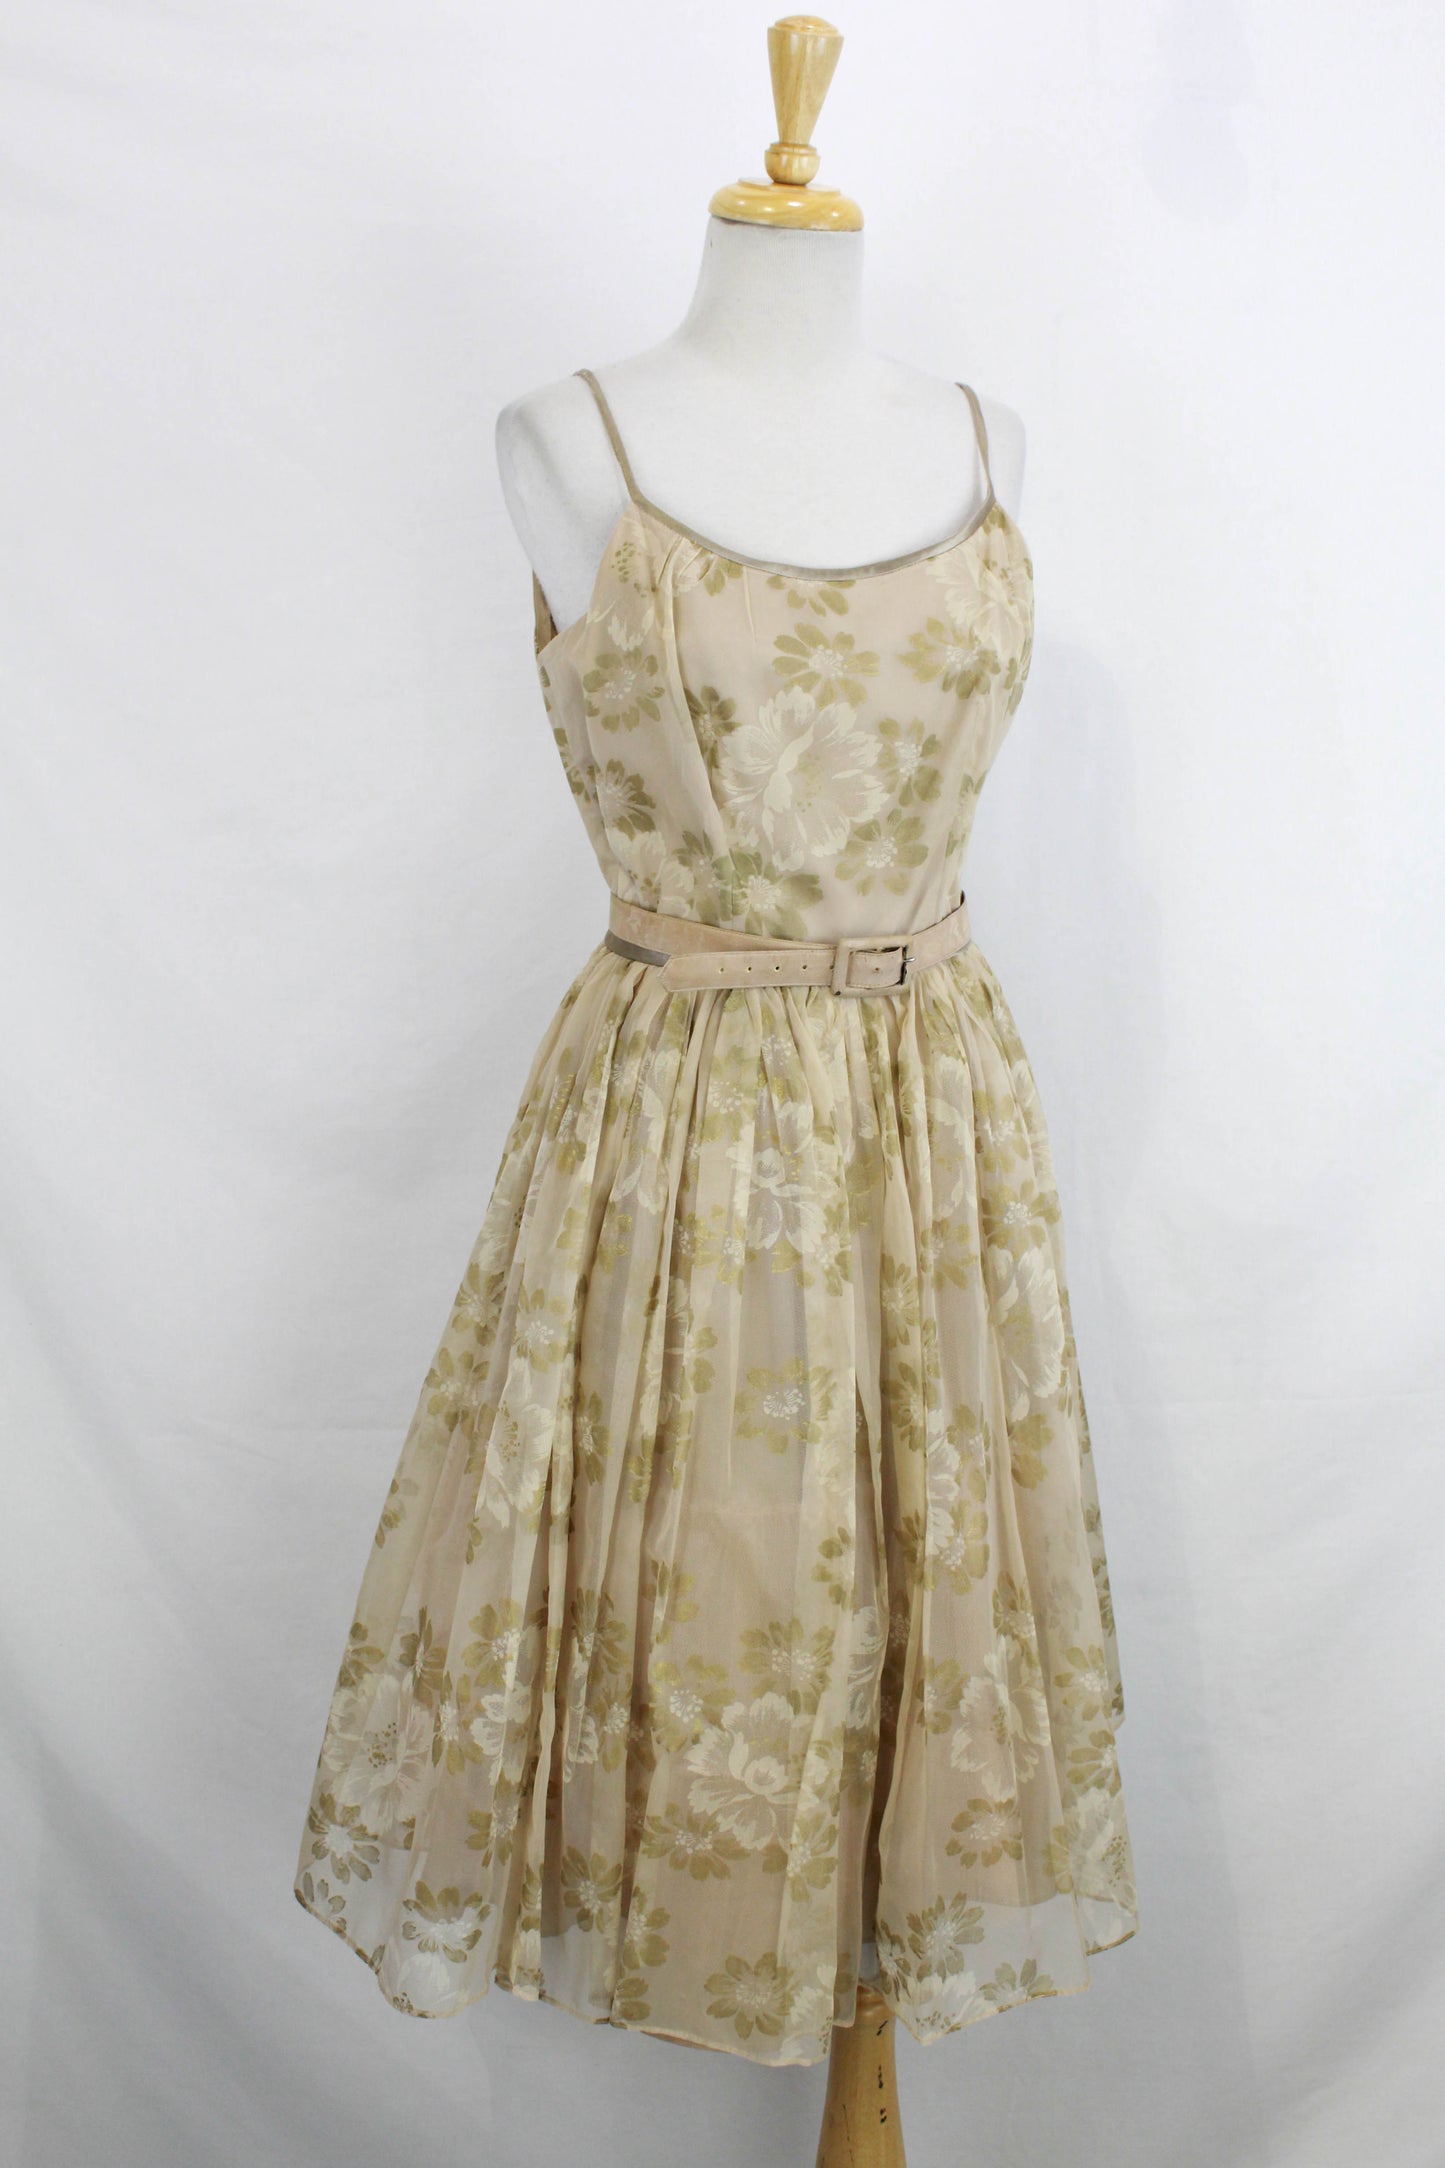 1950s Taupe Floral Print Chiffon Party Dress, Full Skirt Gathered with Matching Belt, Vintage 50s Womens Fit and Flare, True Vintage, Ian Drummond Vintage